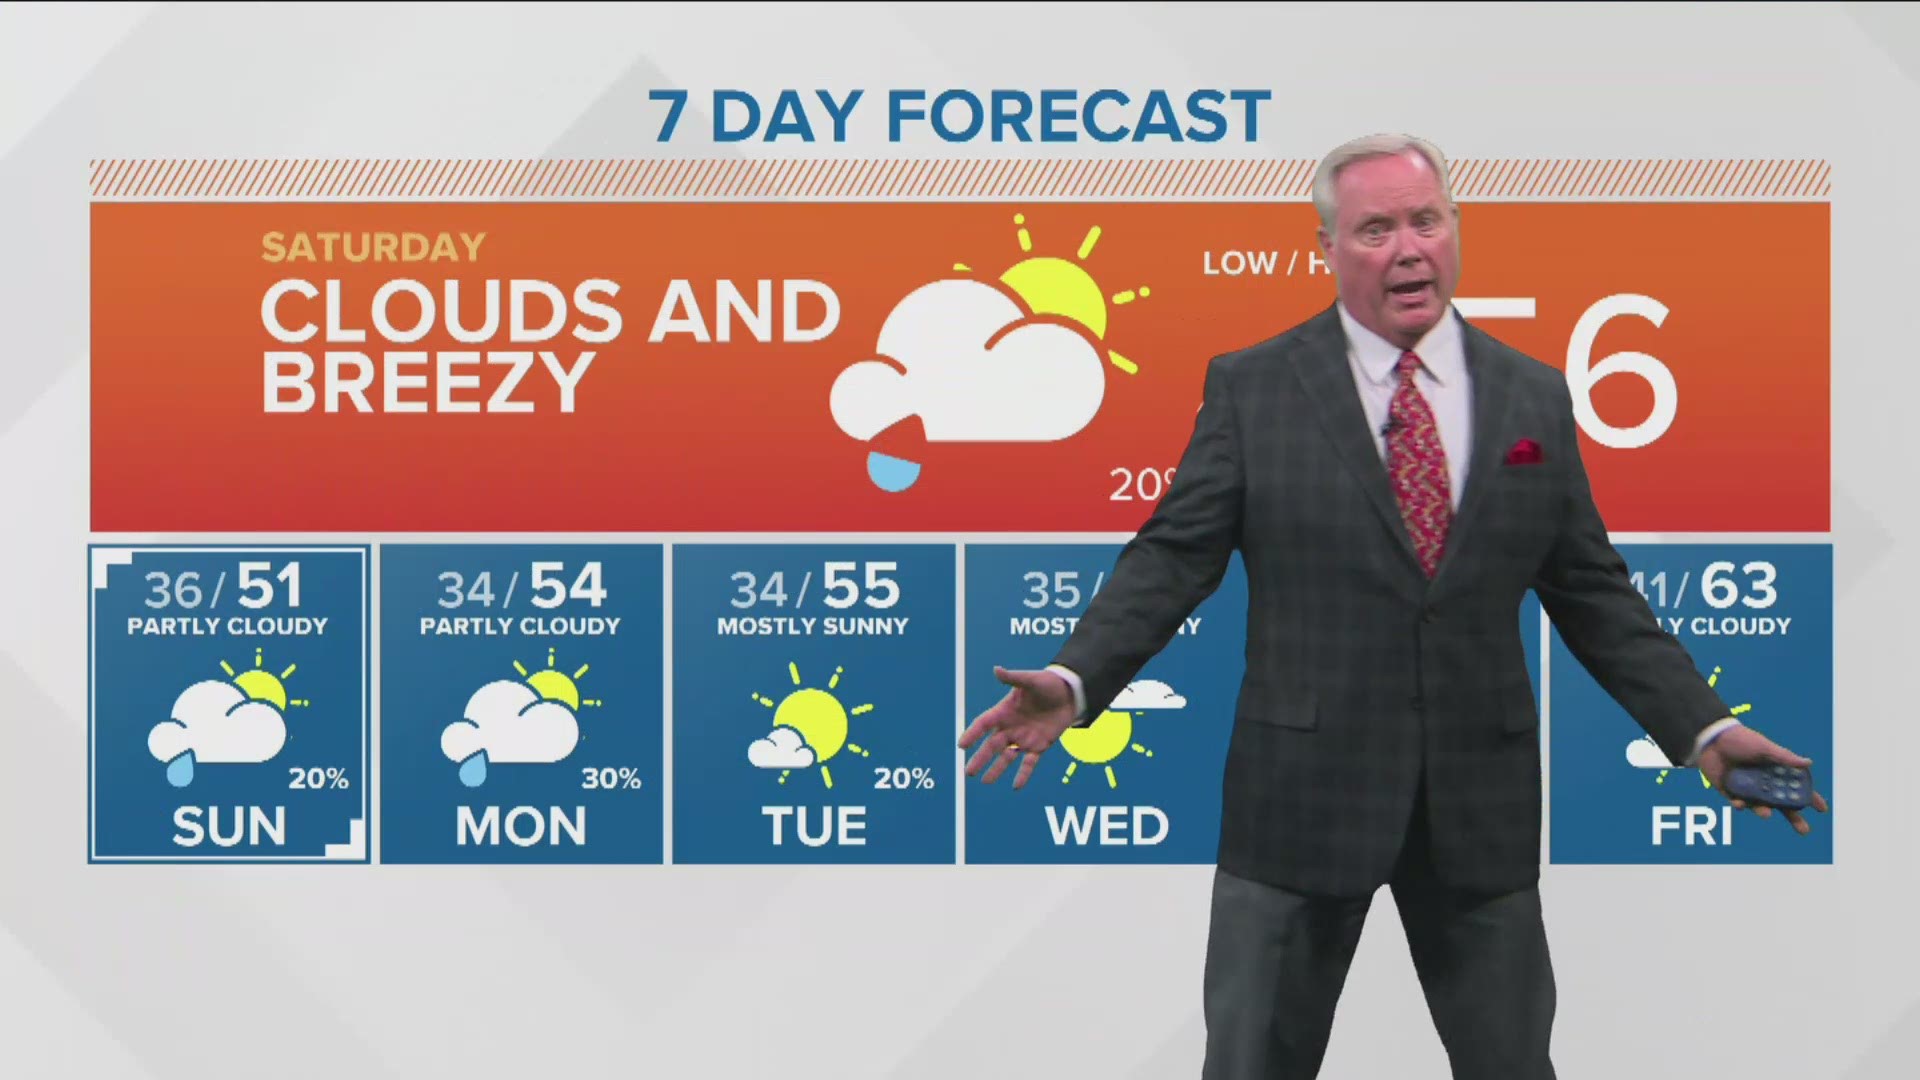 Rick Lantz says to expect breezy conditions with a chance of rain Saturday.